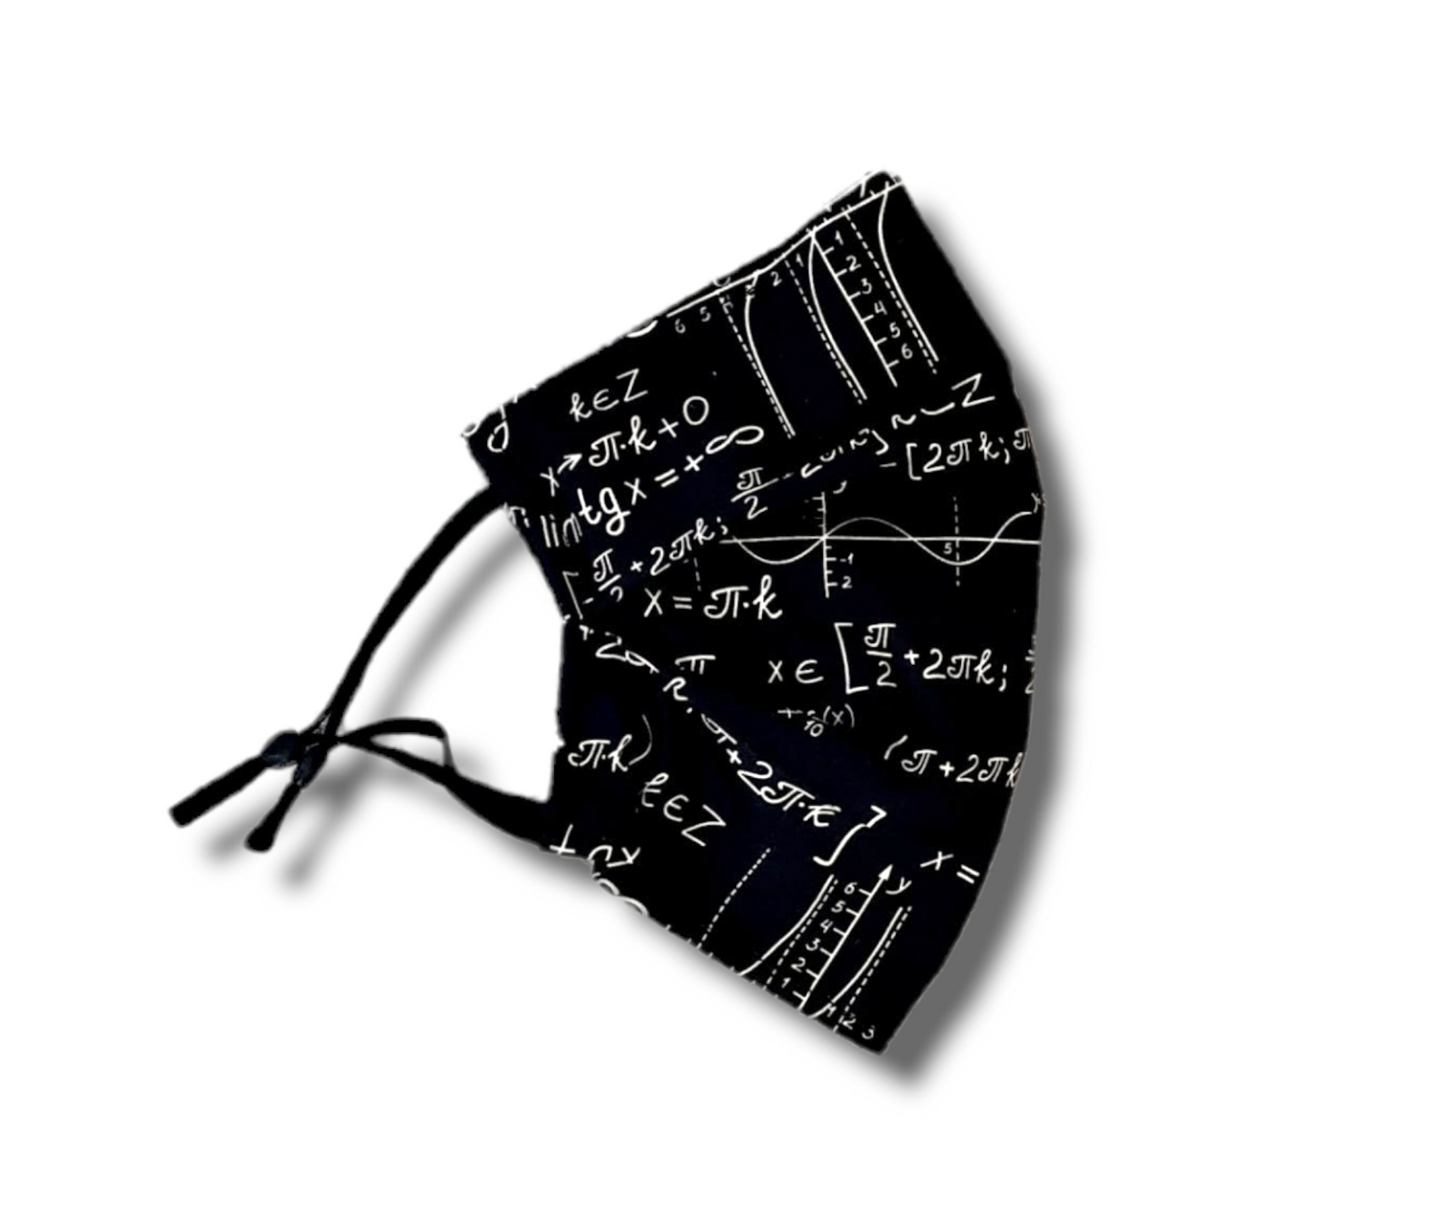 Black mathematics teacher, student facemask. Washable and reusable with filter pocket. Adjustable elastic ear loops with toggle adjustment.